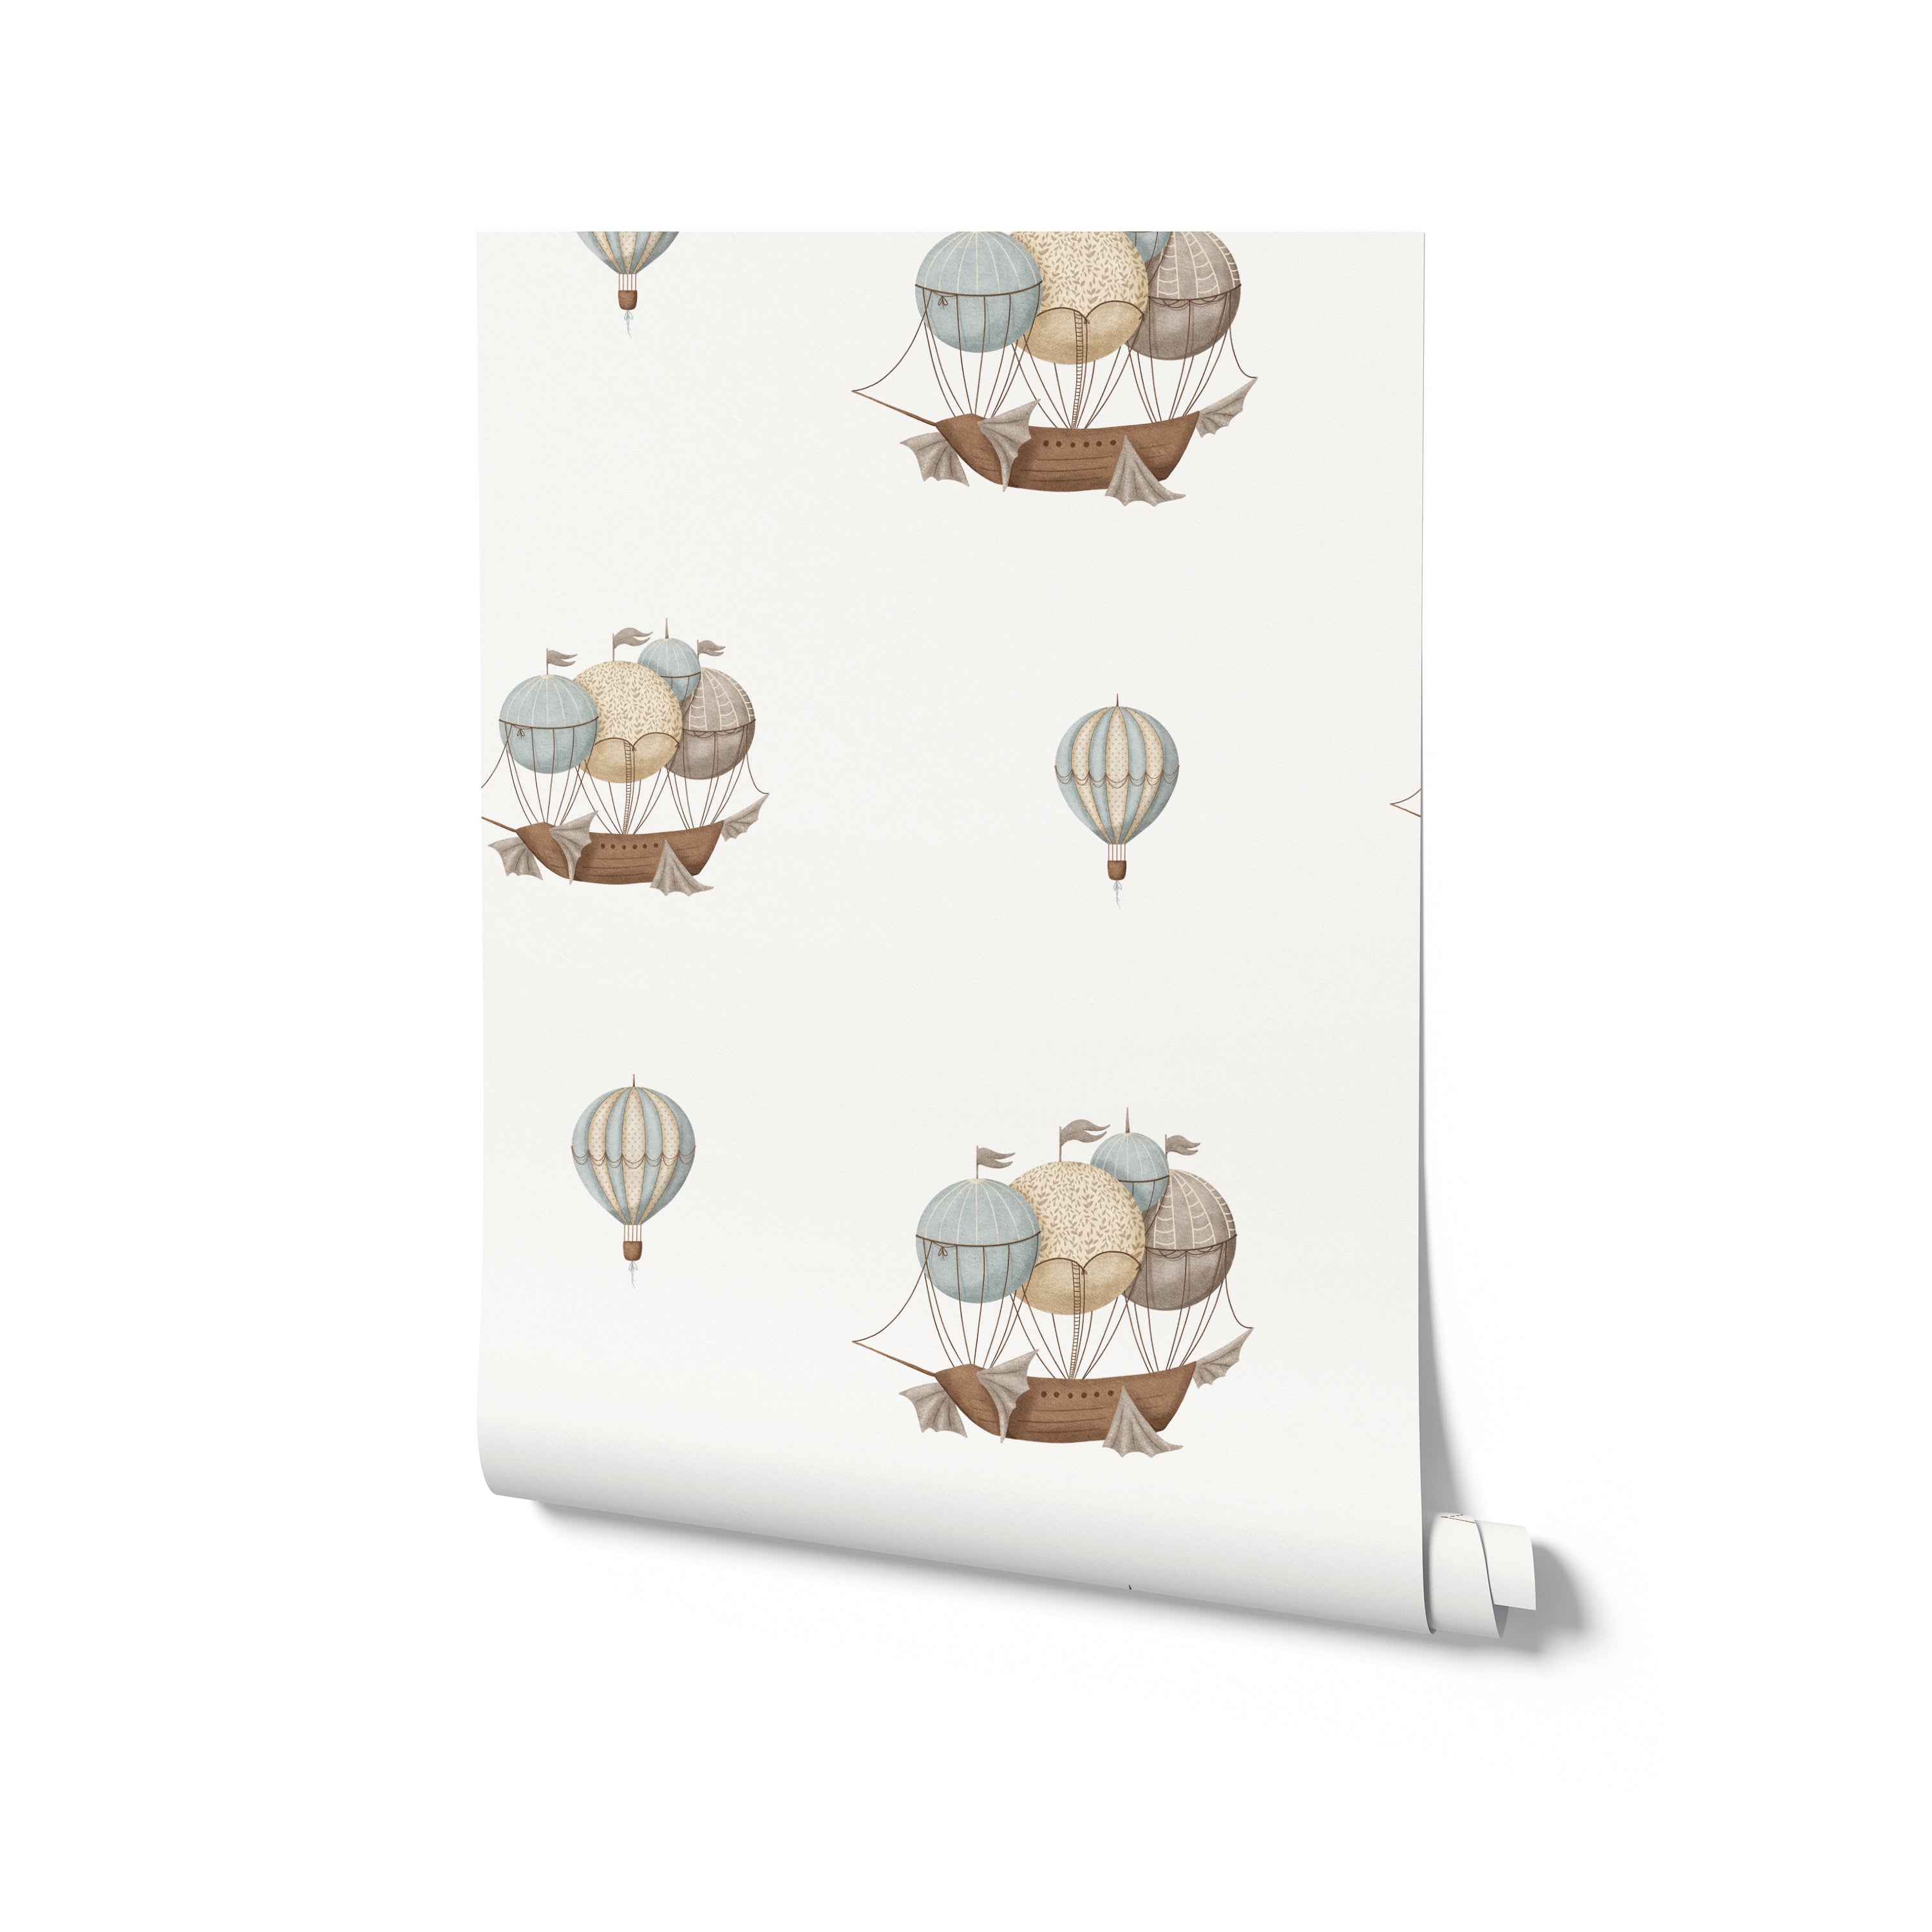 Roll of Nautical Balloons Wallpaper, displaying a playful pattern of airships and hot air balloons against a light background.